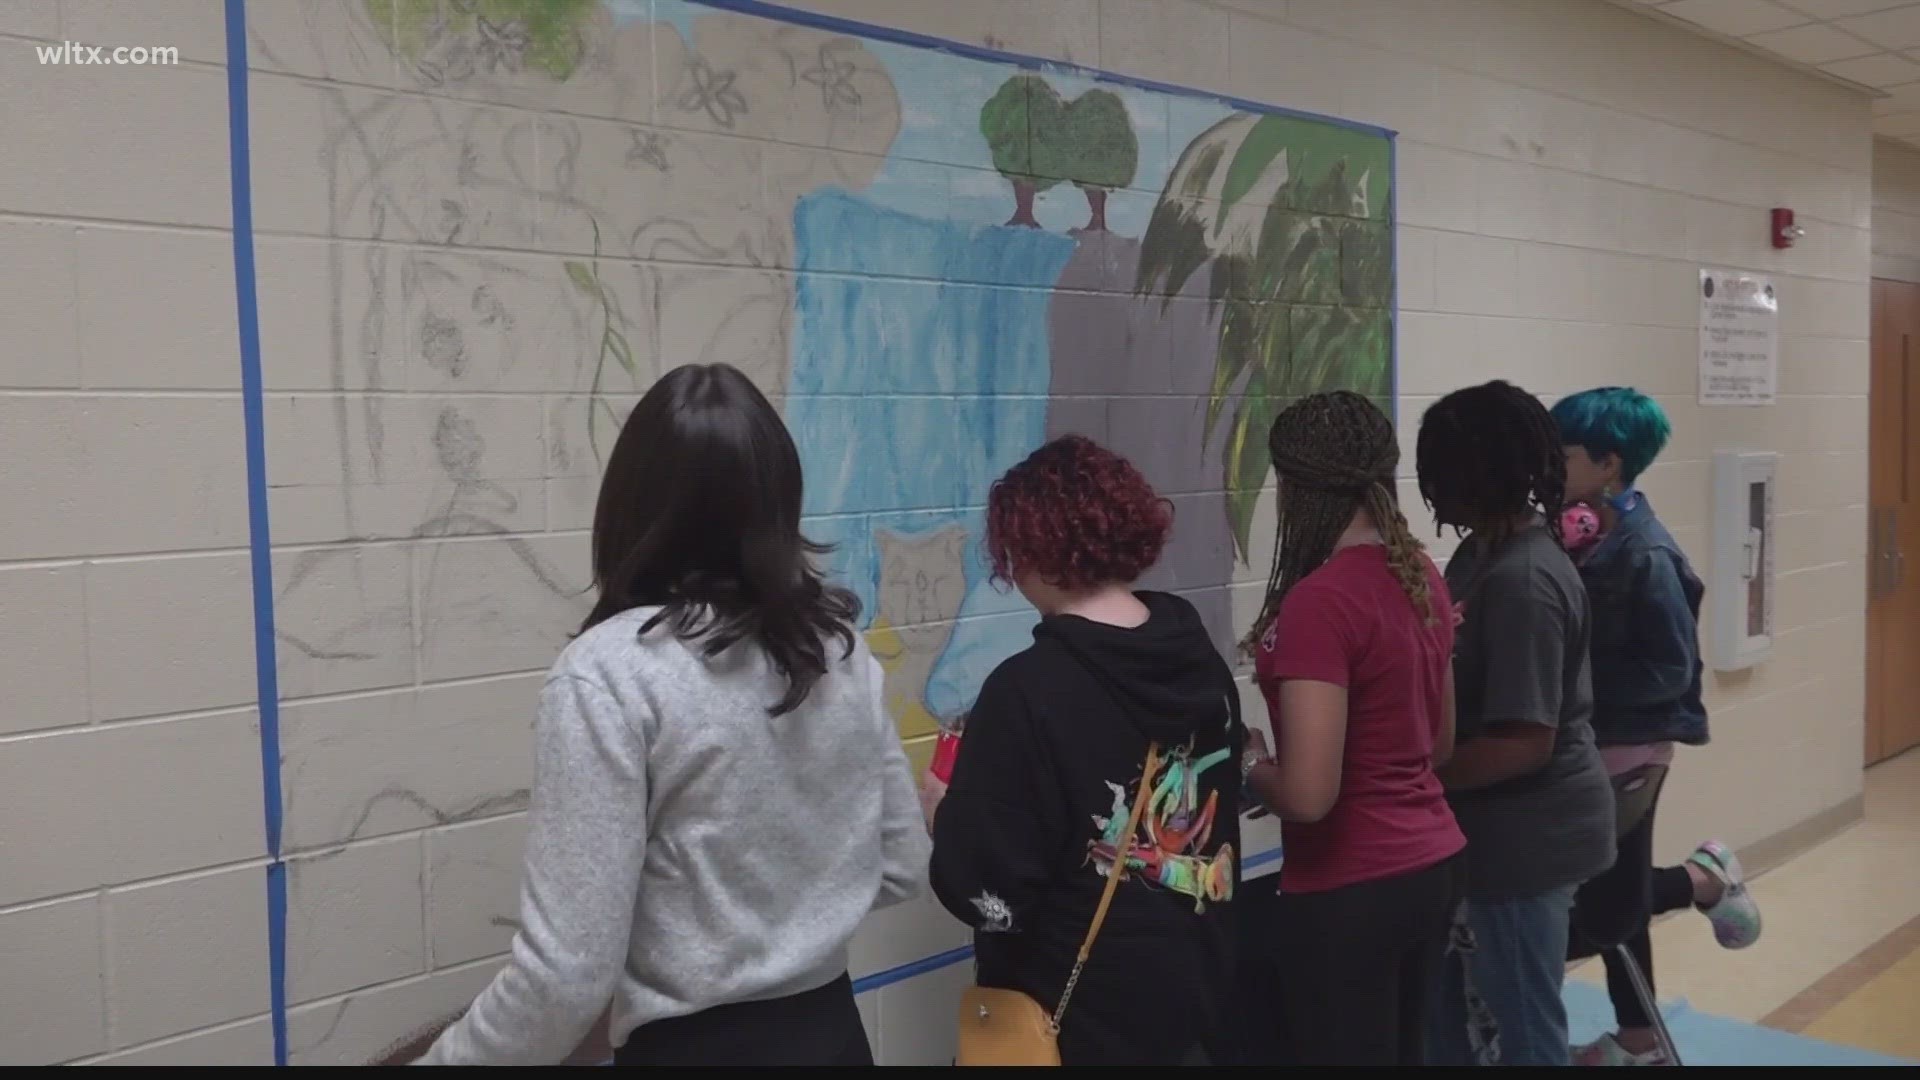 Student Baya Hardee's drawing is being made into a mural.